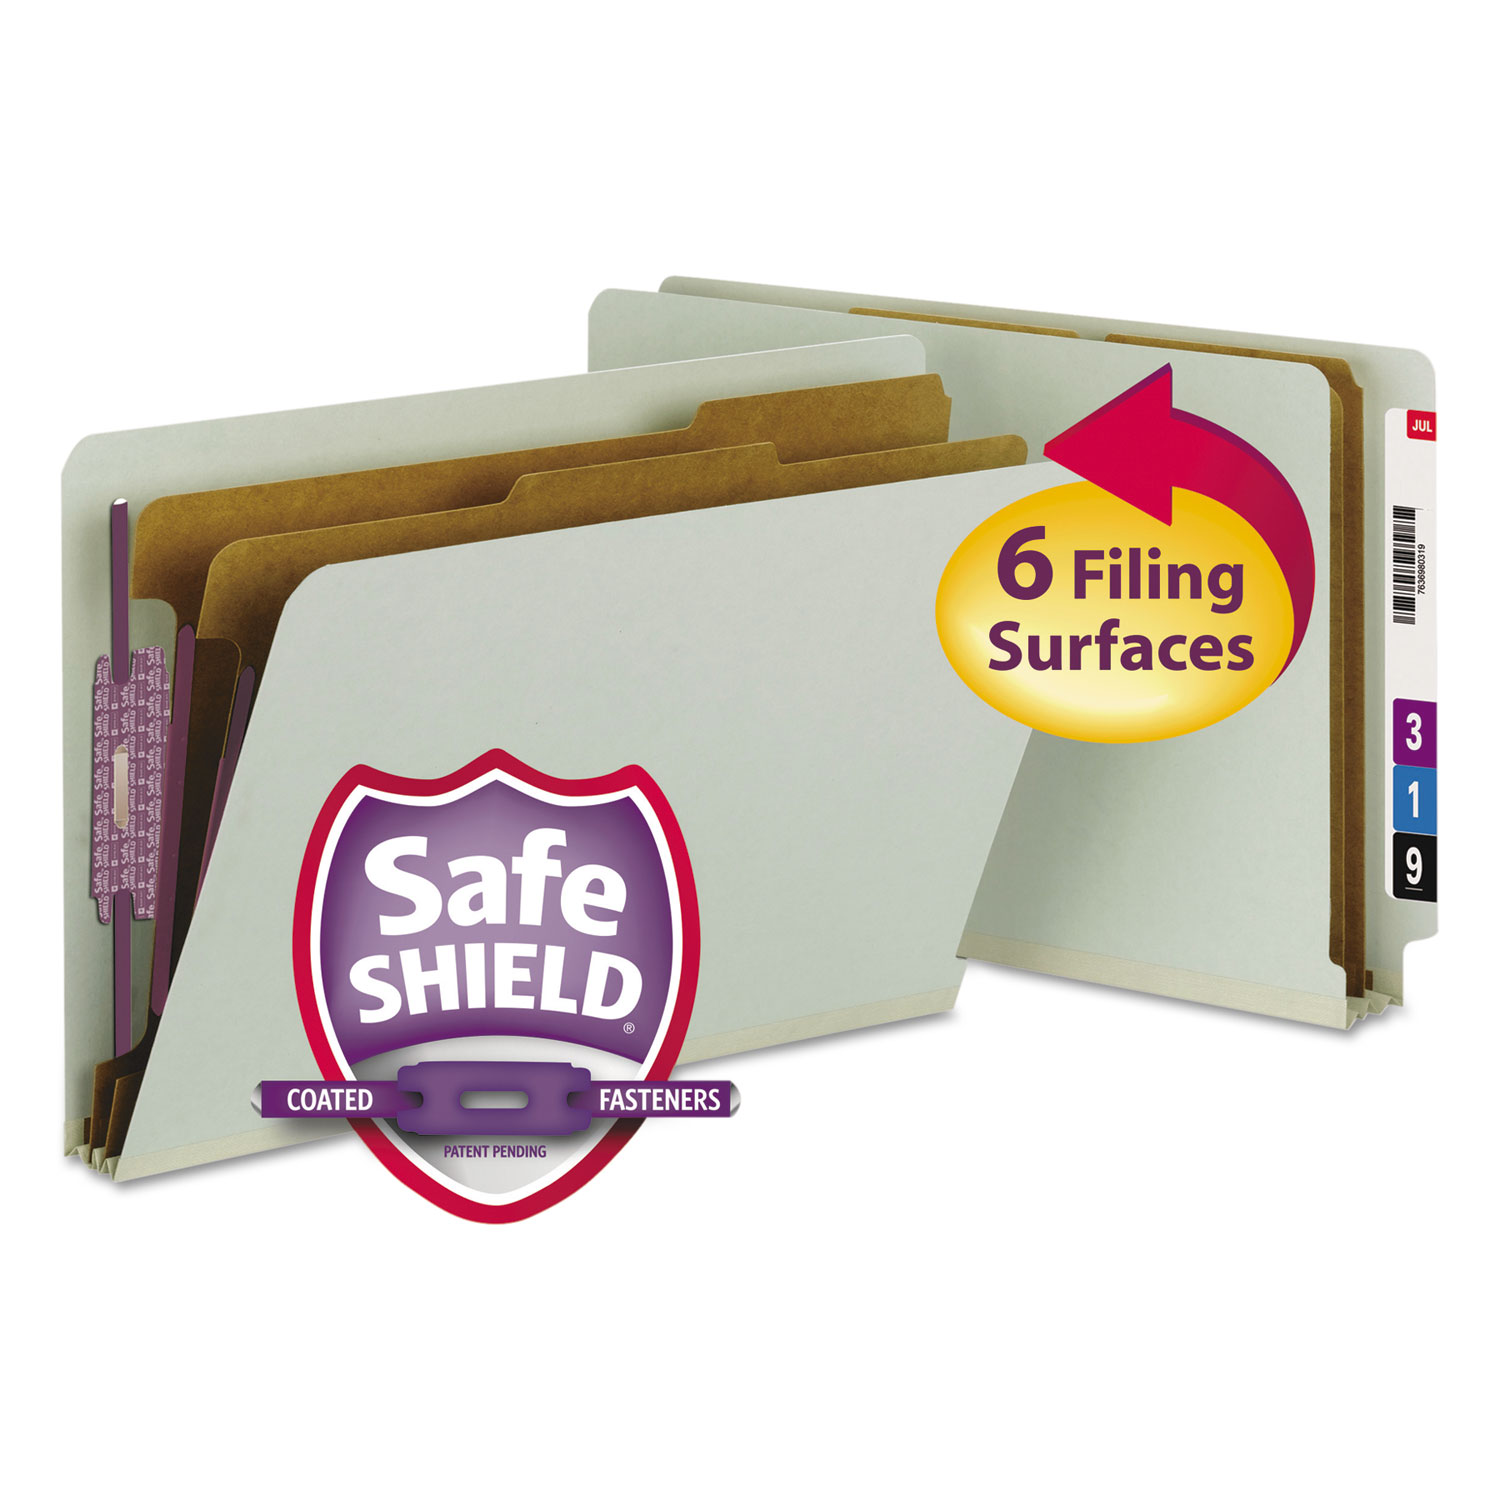  Smead 29810 End Tab Pressboard Classification Folders with SafeSHIELD Coated Fasteners, 2 Dividers, Legal Size, Gray-Green, 10/Box (SMD29810) 